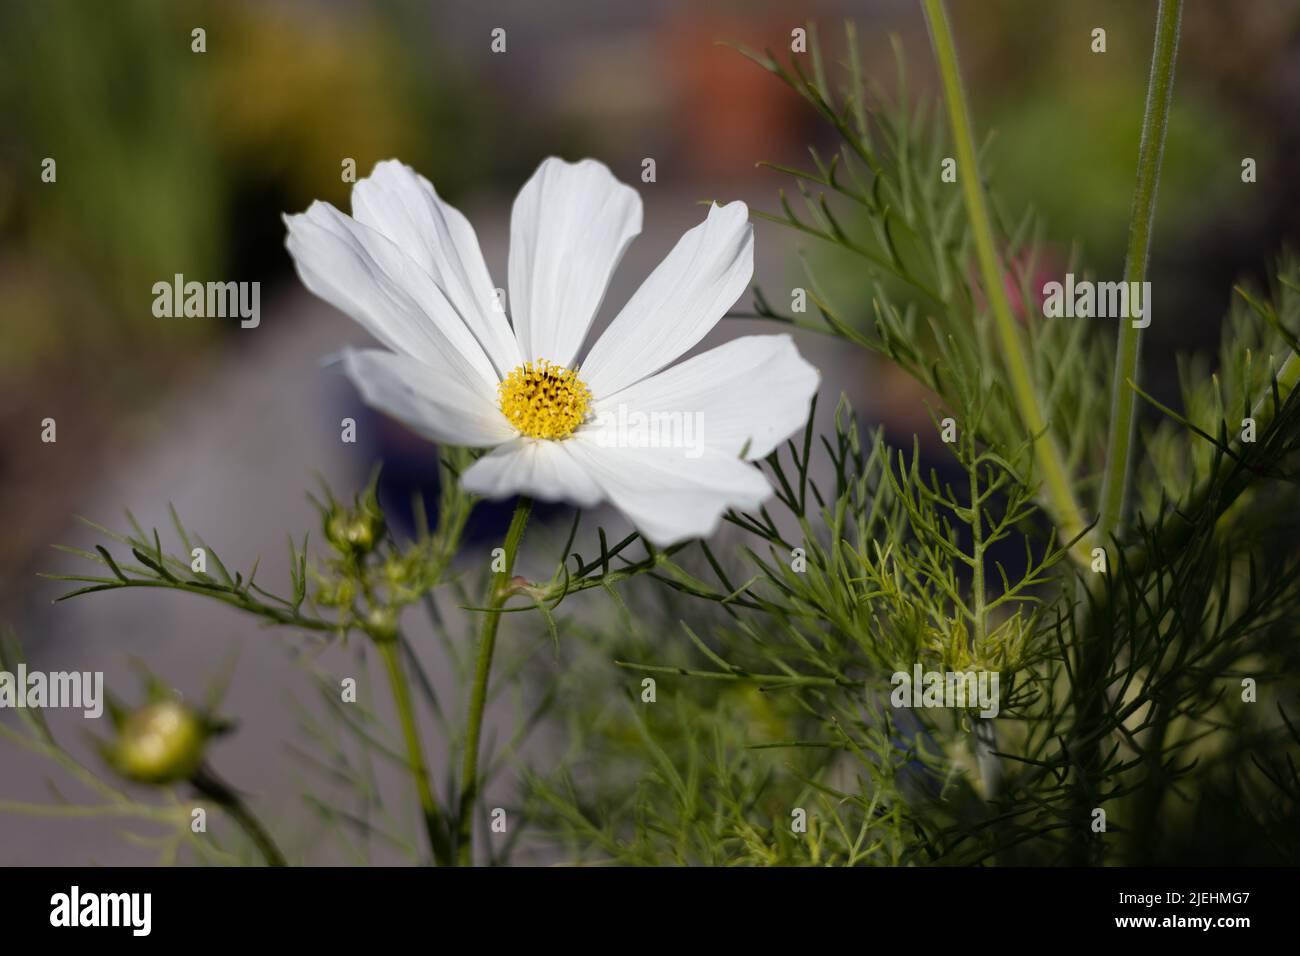 Cosmos bipinnatus 'Purity' is a Half hardy annual flower easily grown from seed, flowering in a garden, Bristol, Uk Stock Photo